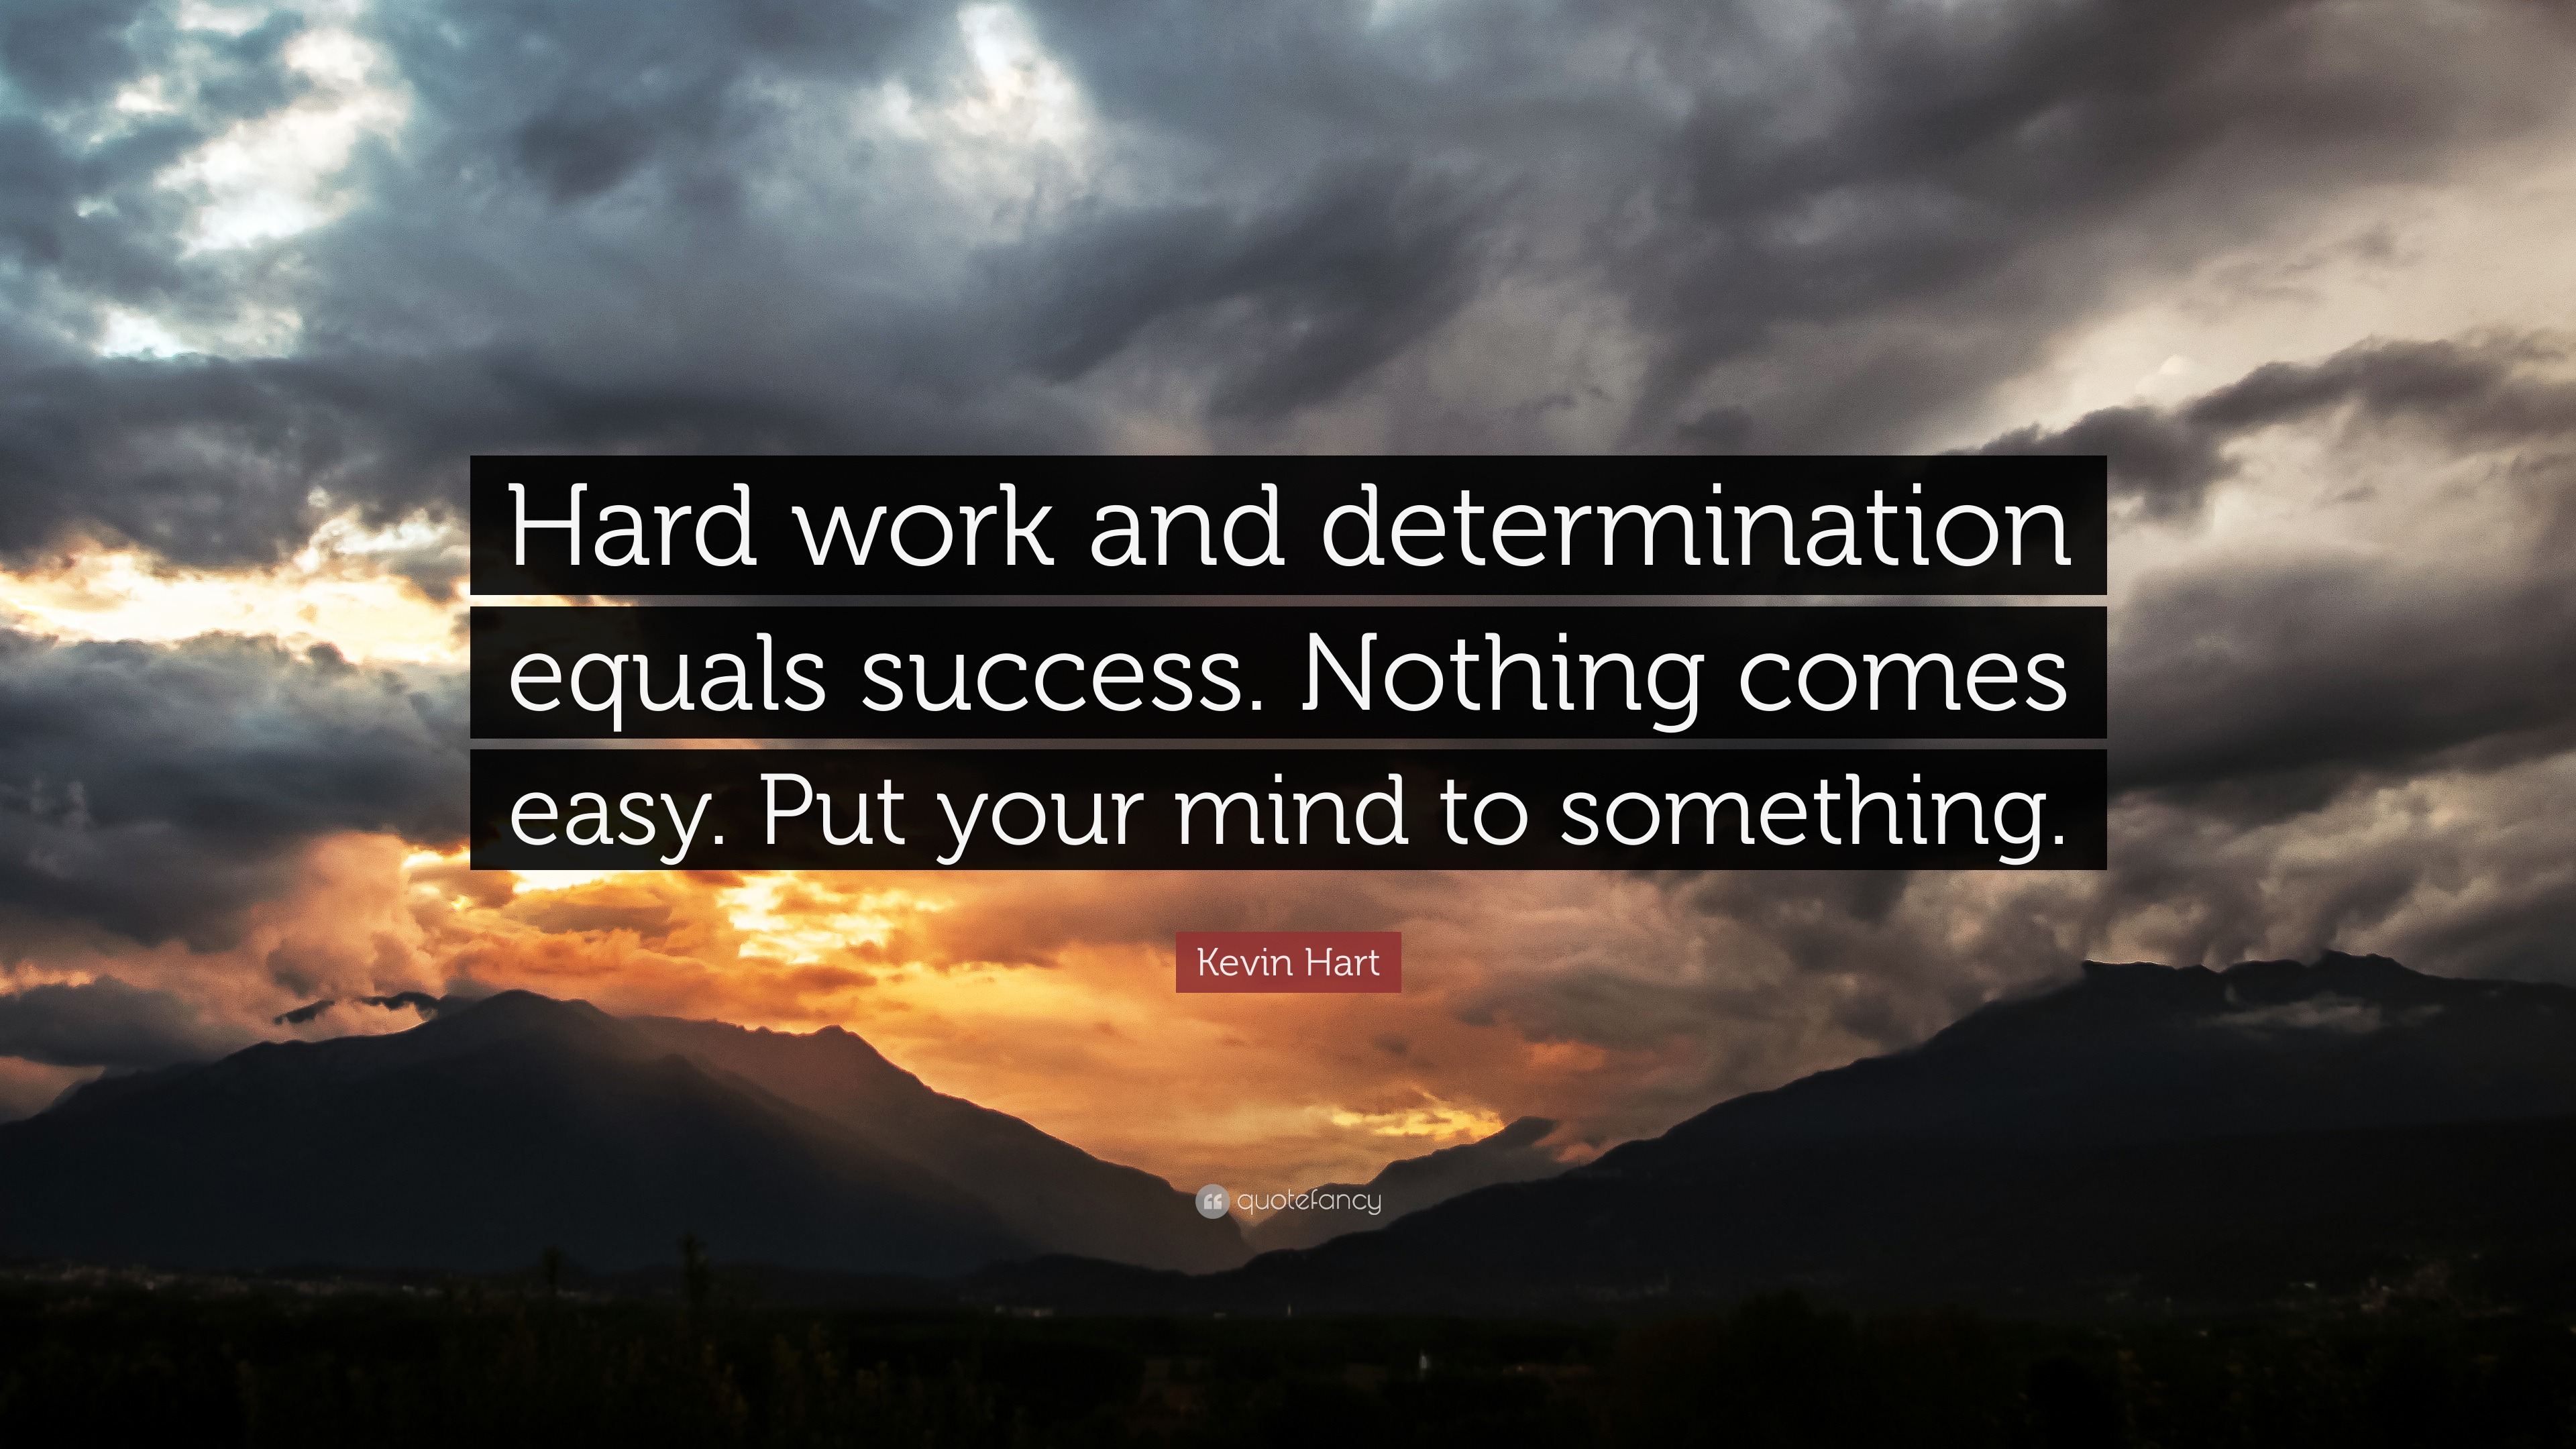 Kevin Hart Quote: “Hard work and determination equals success. Nothing